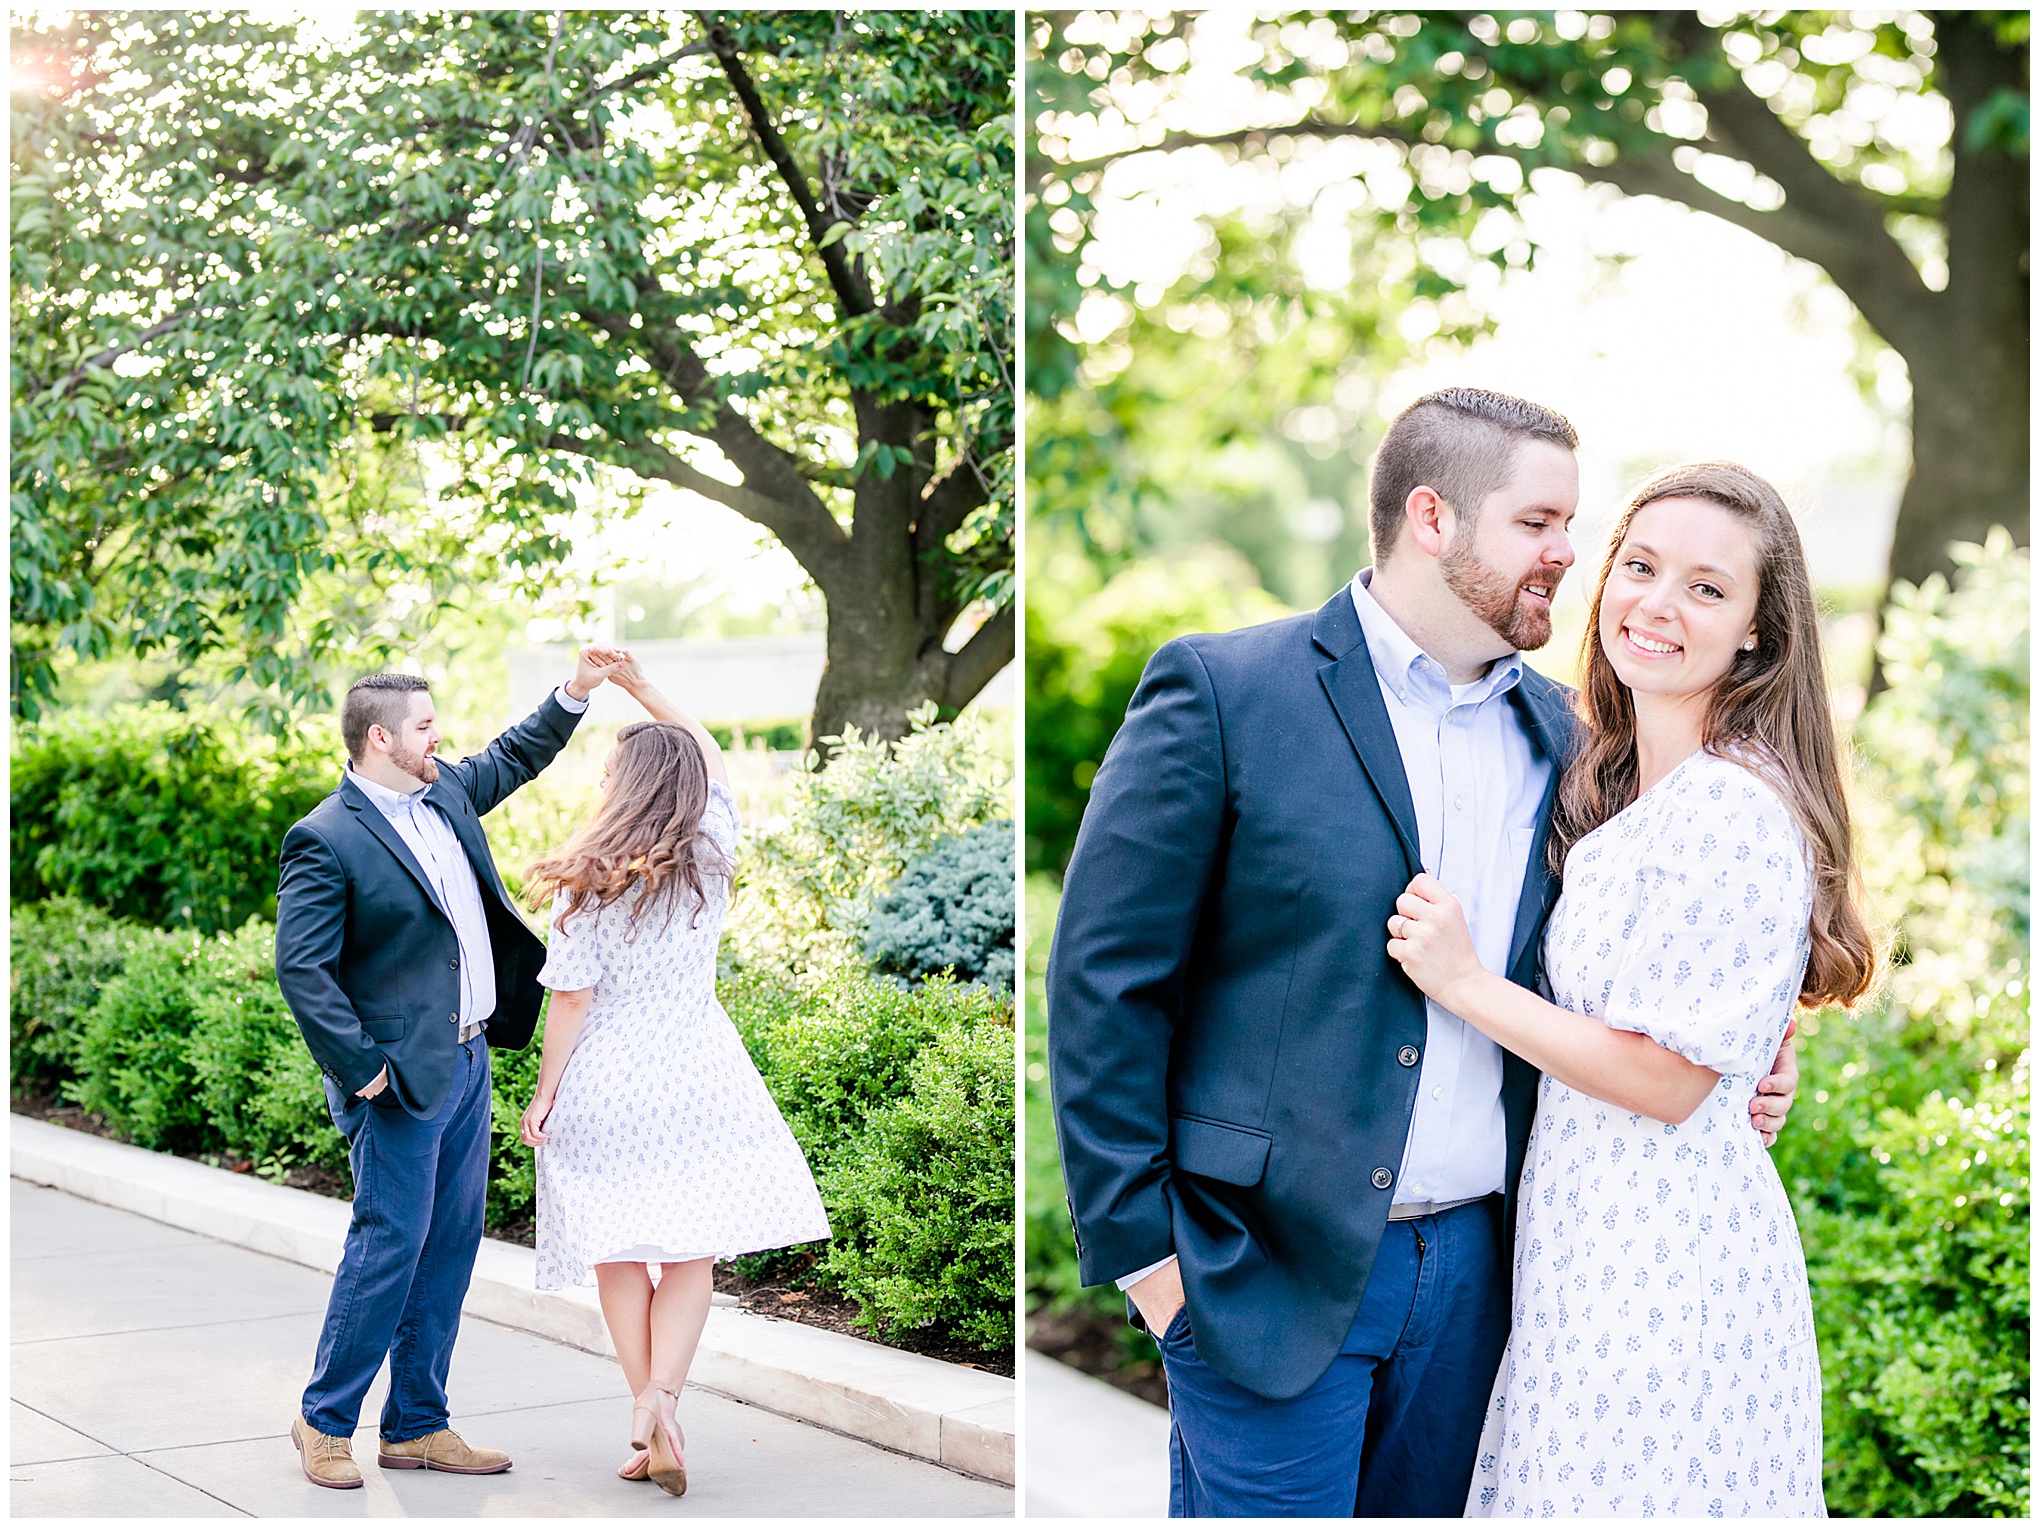 Capitol Hill engagement session, Capitol Hill portraits, D.C. engagement photography, D.C. engagement photographer, D.C. Capitol Hill D.C., DC photography, engagement photography, Rachel E.H. Photography, classic engagement photos, spring engagement photos, couple dancing